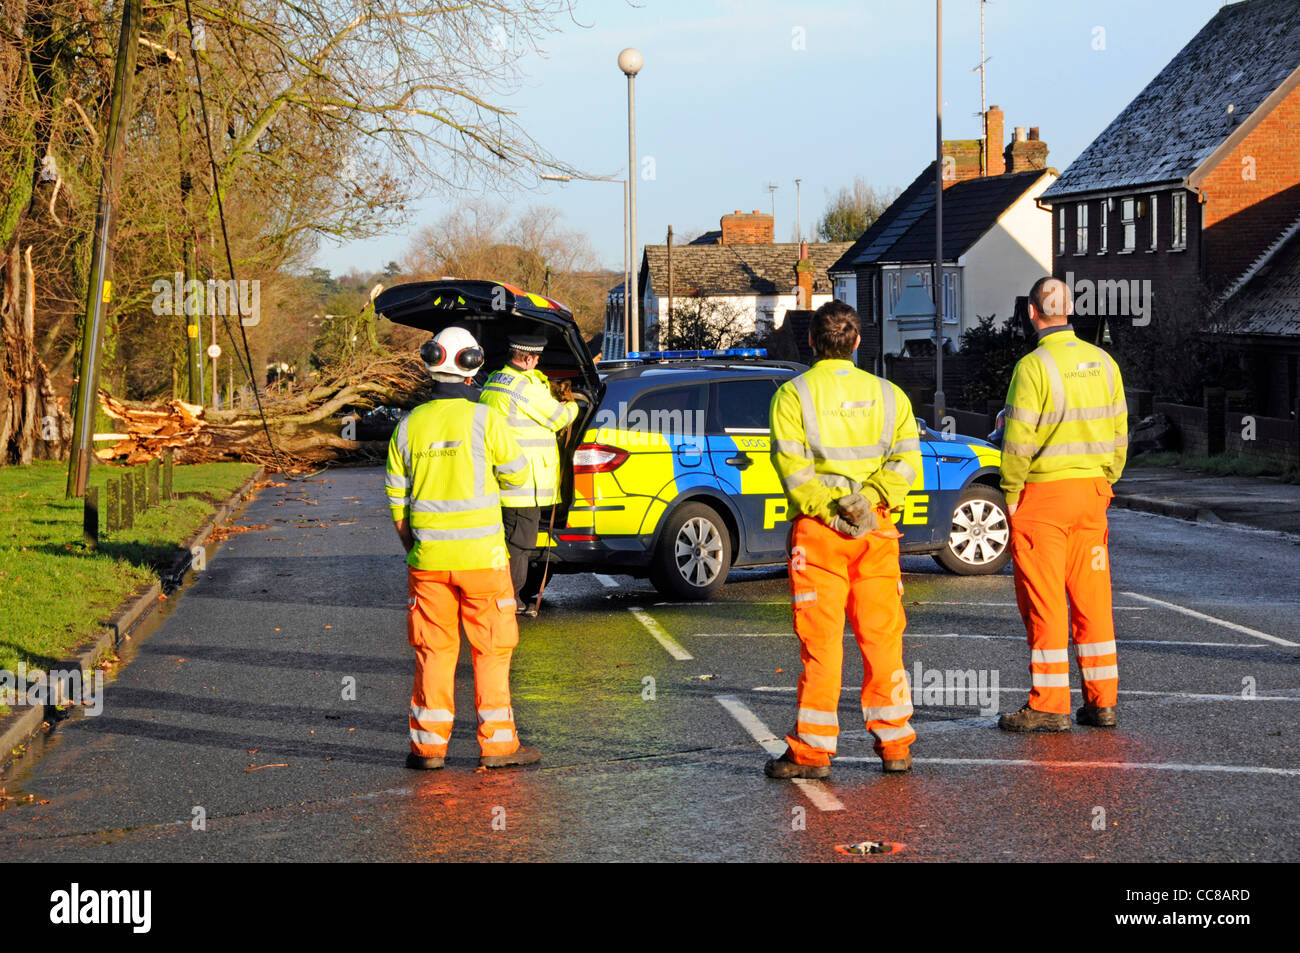 Workmen wait electricity disconnection team tree blown over in winter storm fallen tree live cables road closed police car attending Essex England UK Stock Photo